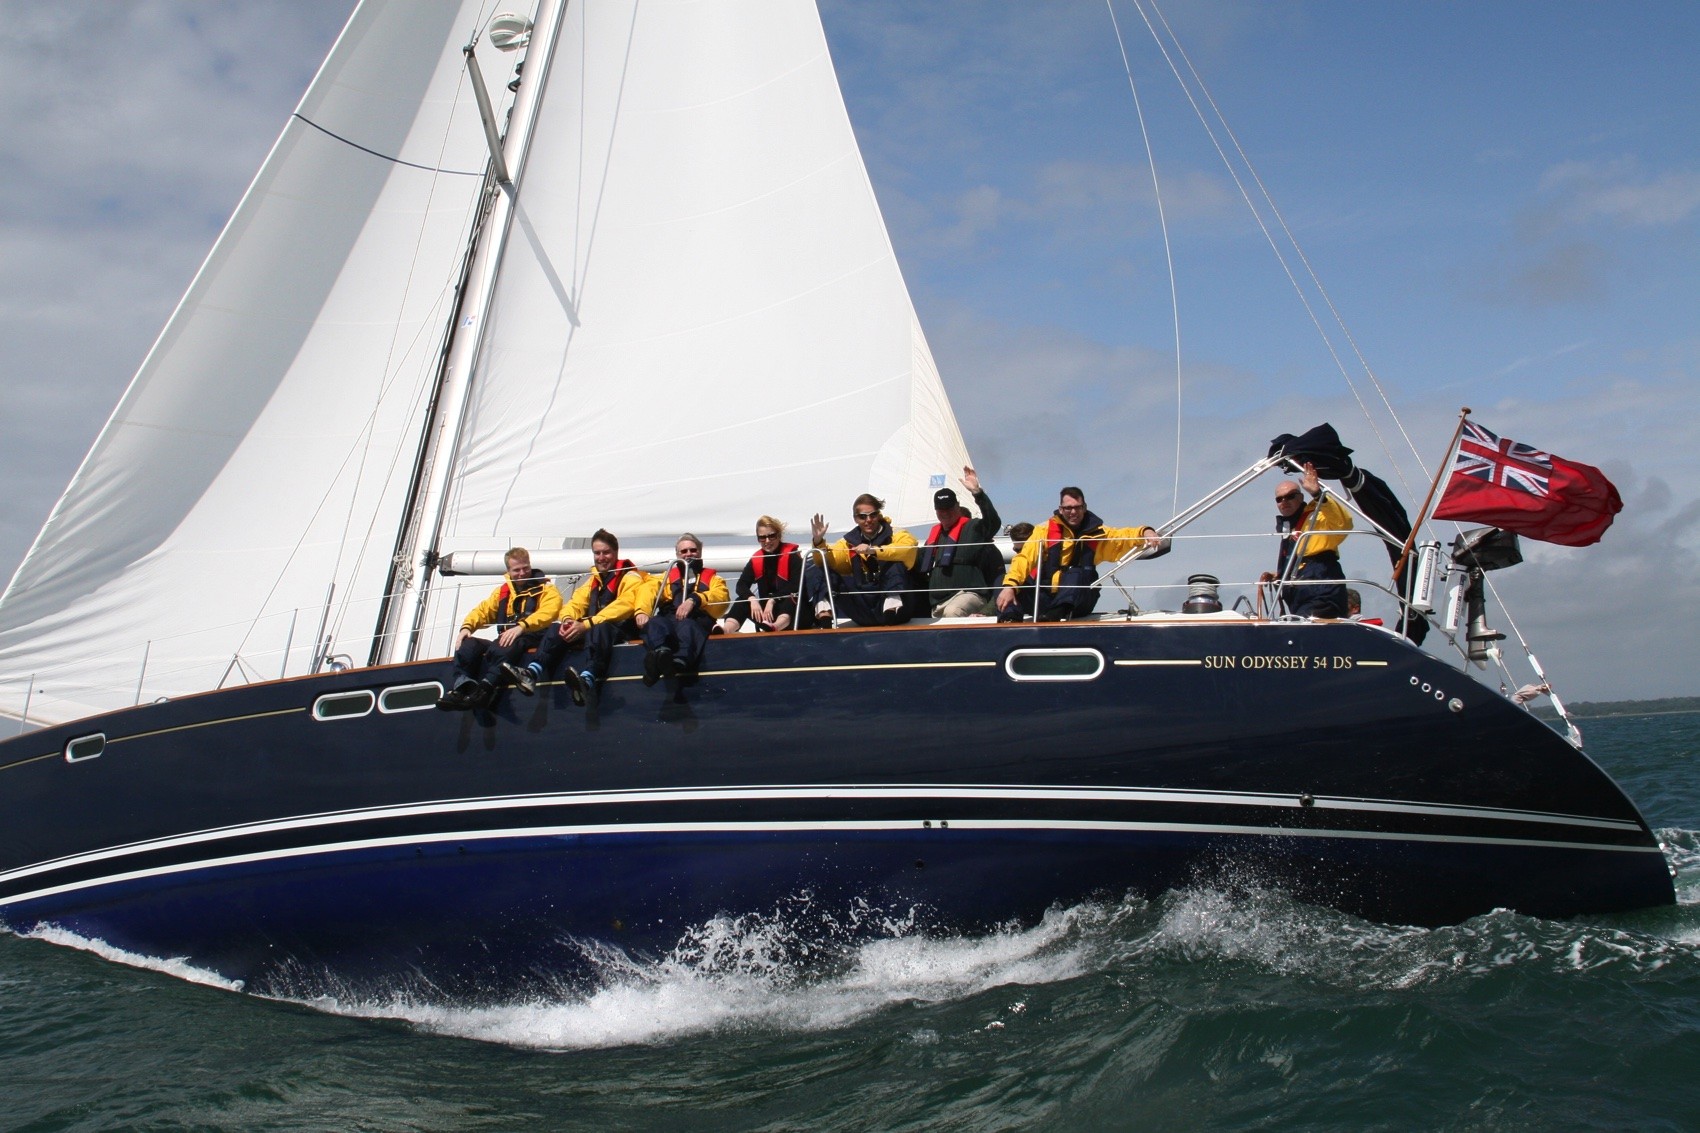 Jeanneau 54DS - Yacht Charter The Solent & Boat hire in United Kingdom England The Solent Lymington Lymington Yacht Haven Marina 1